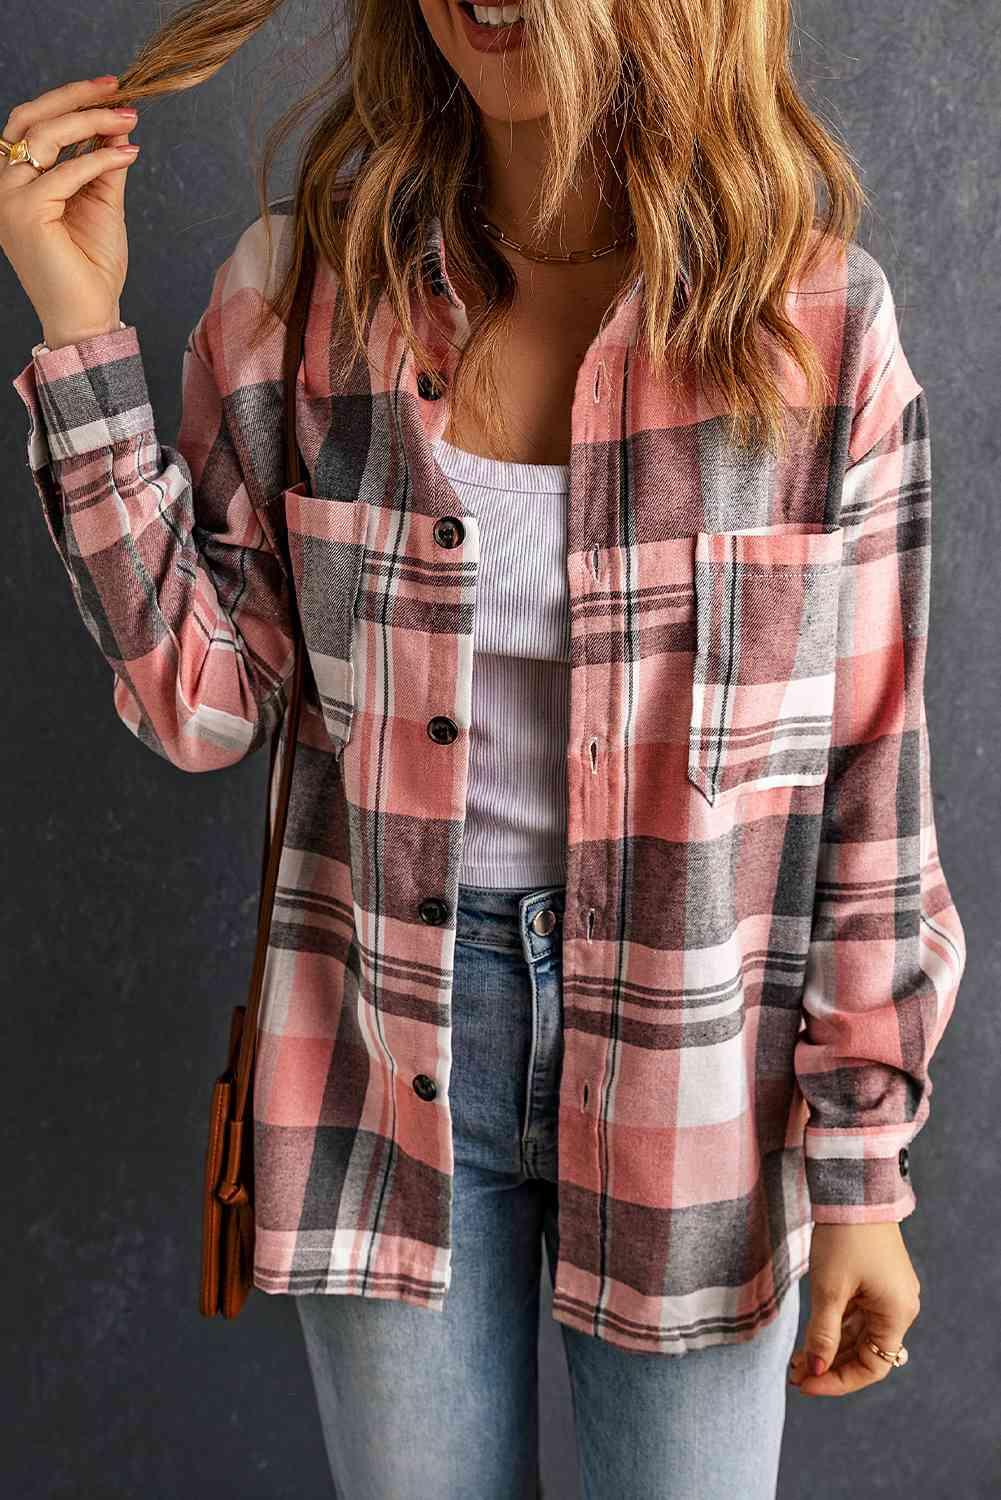 a woman wearing a pink and black plaid shirt